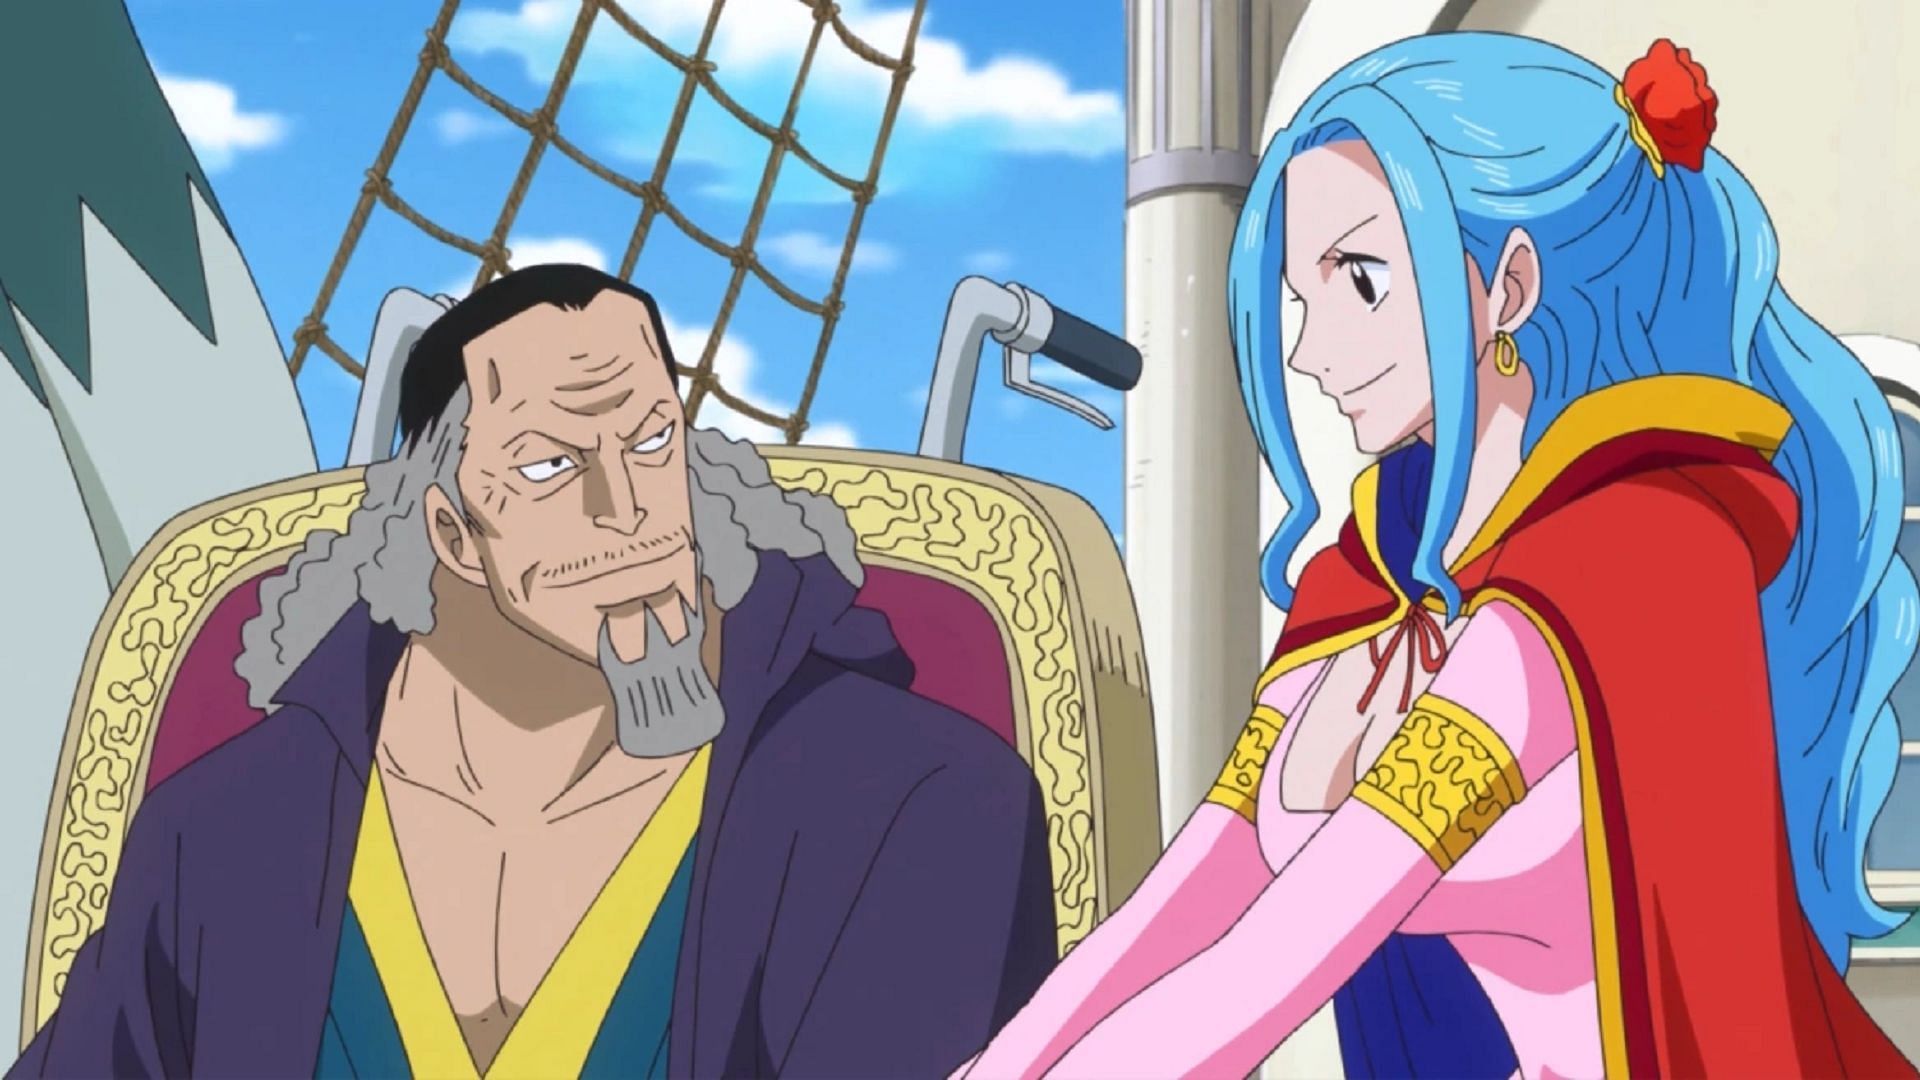 Cobra and Vivi as seen in One Piece (Image via Toei Animation, One Piece)